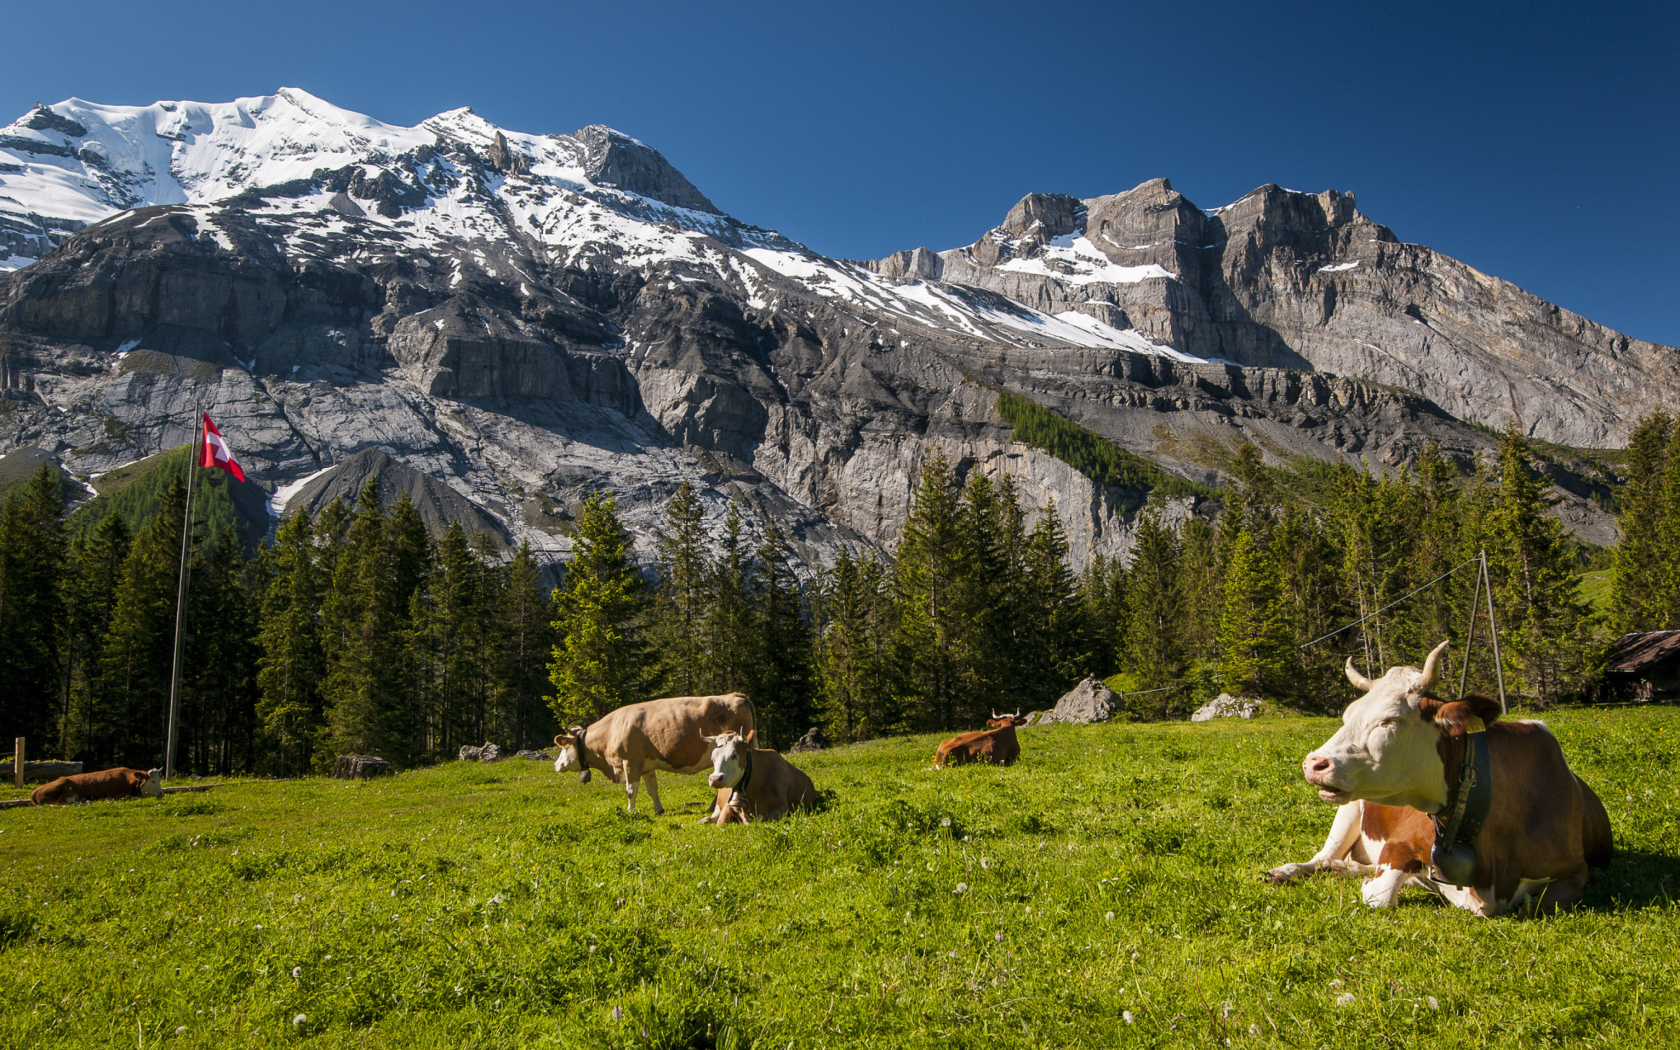 Switzerland Mountains And Cows wallpaper 1680x1050